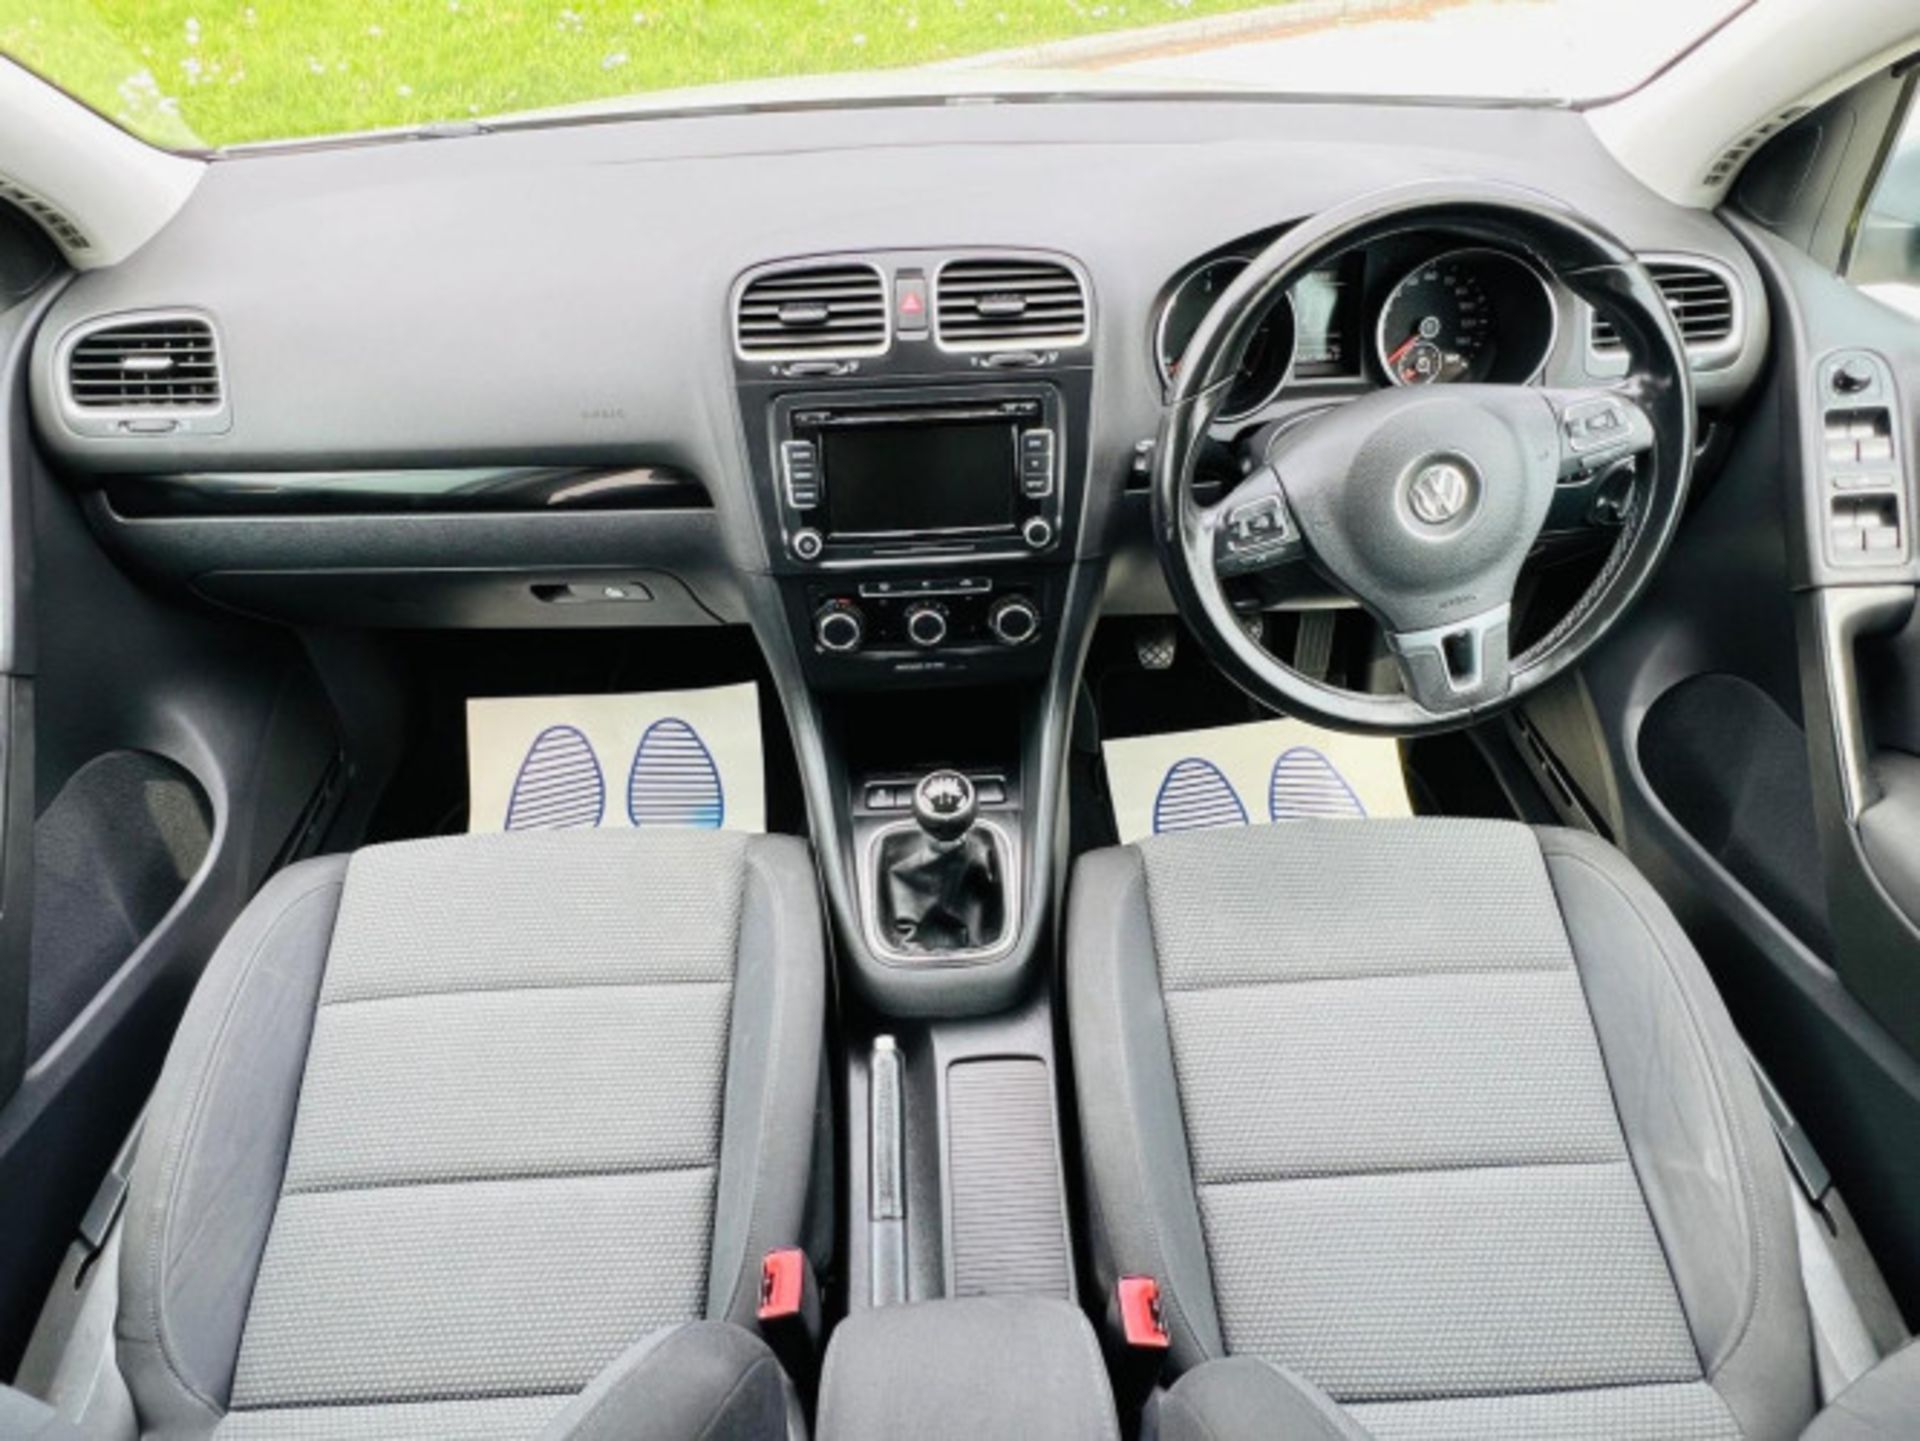 IMPECCABLE 2012 VOLKSWAGEN GOLF 1.6 TDI MATCH >>--NO VAT ON HAMMER--<< - Image 86 of 116